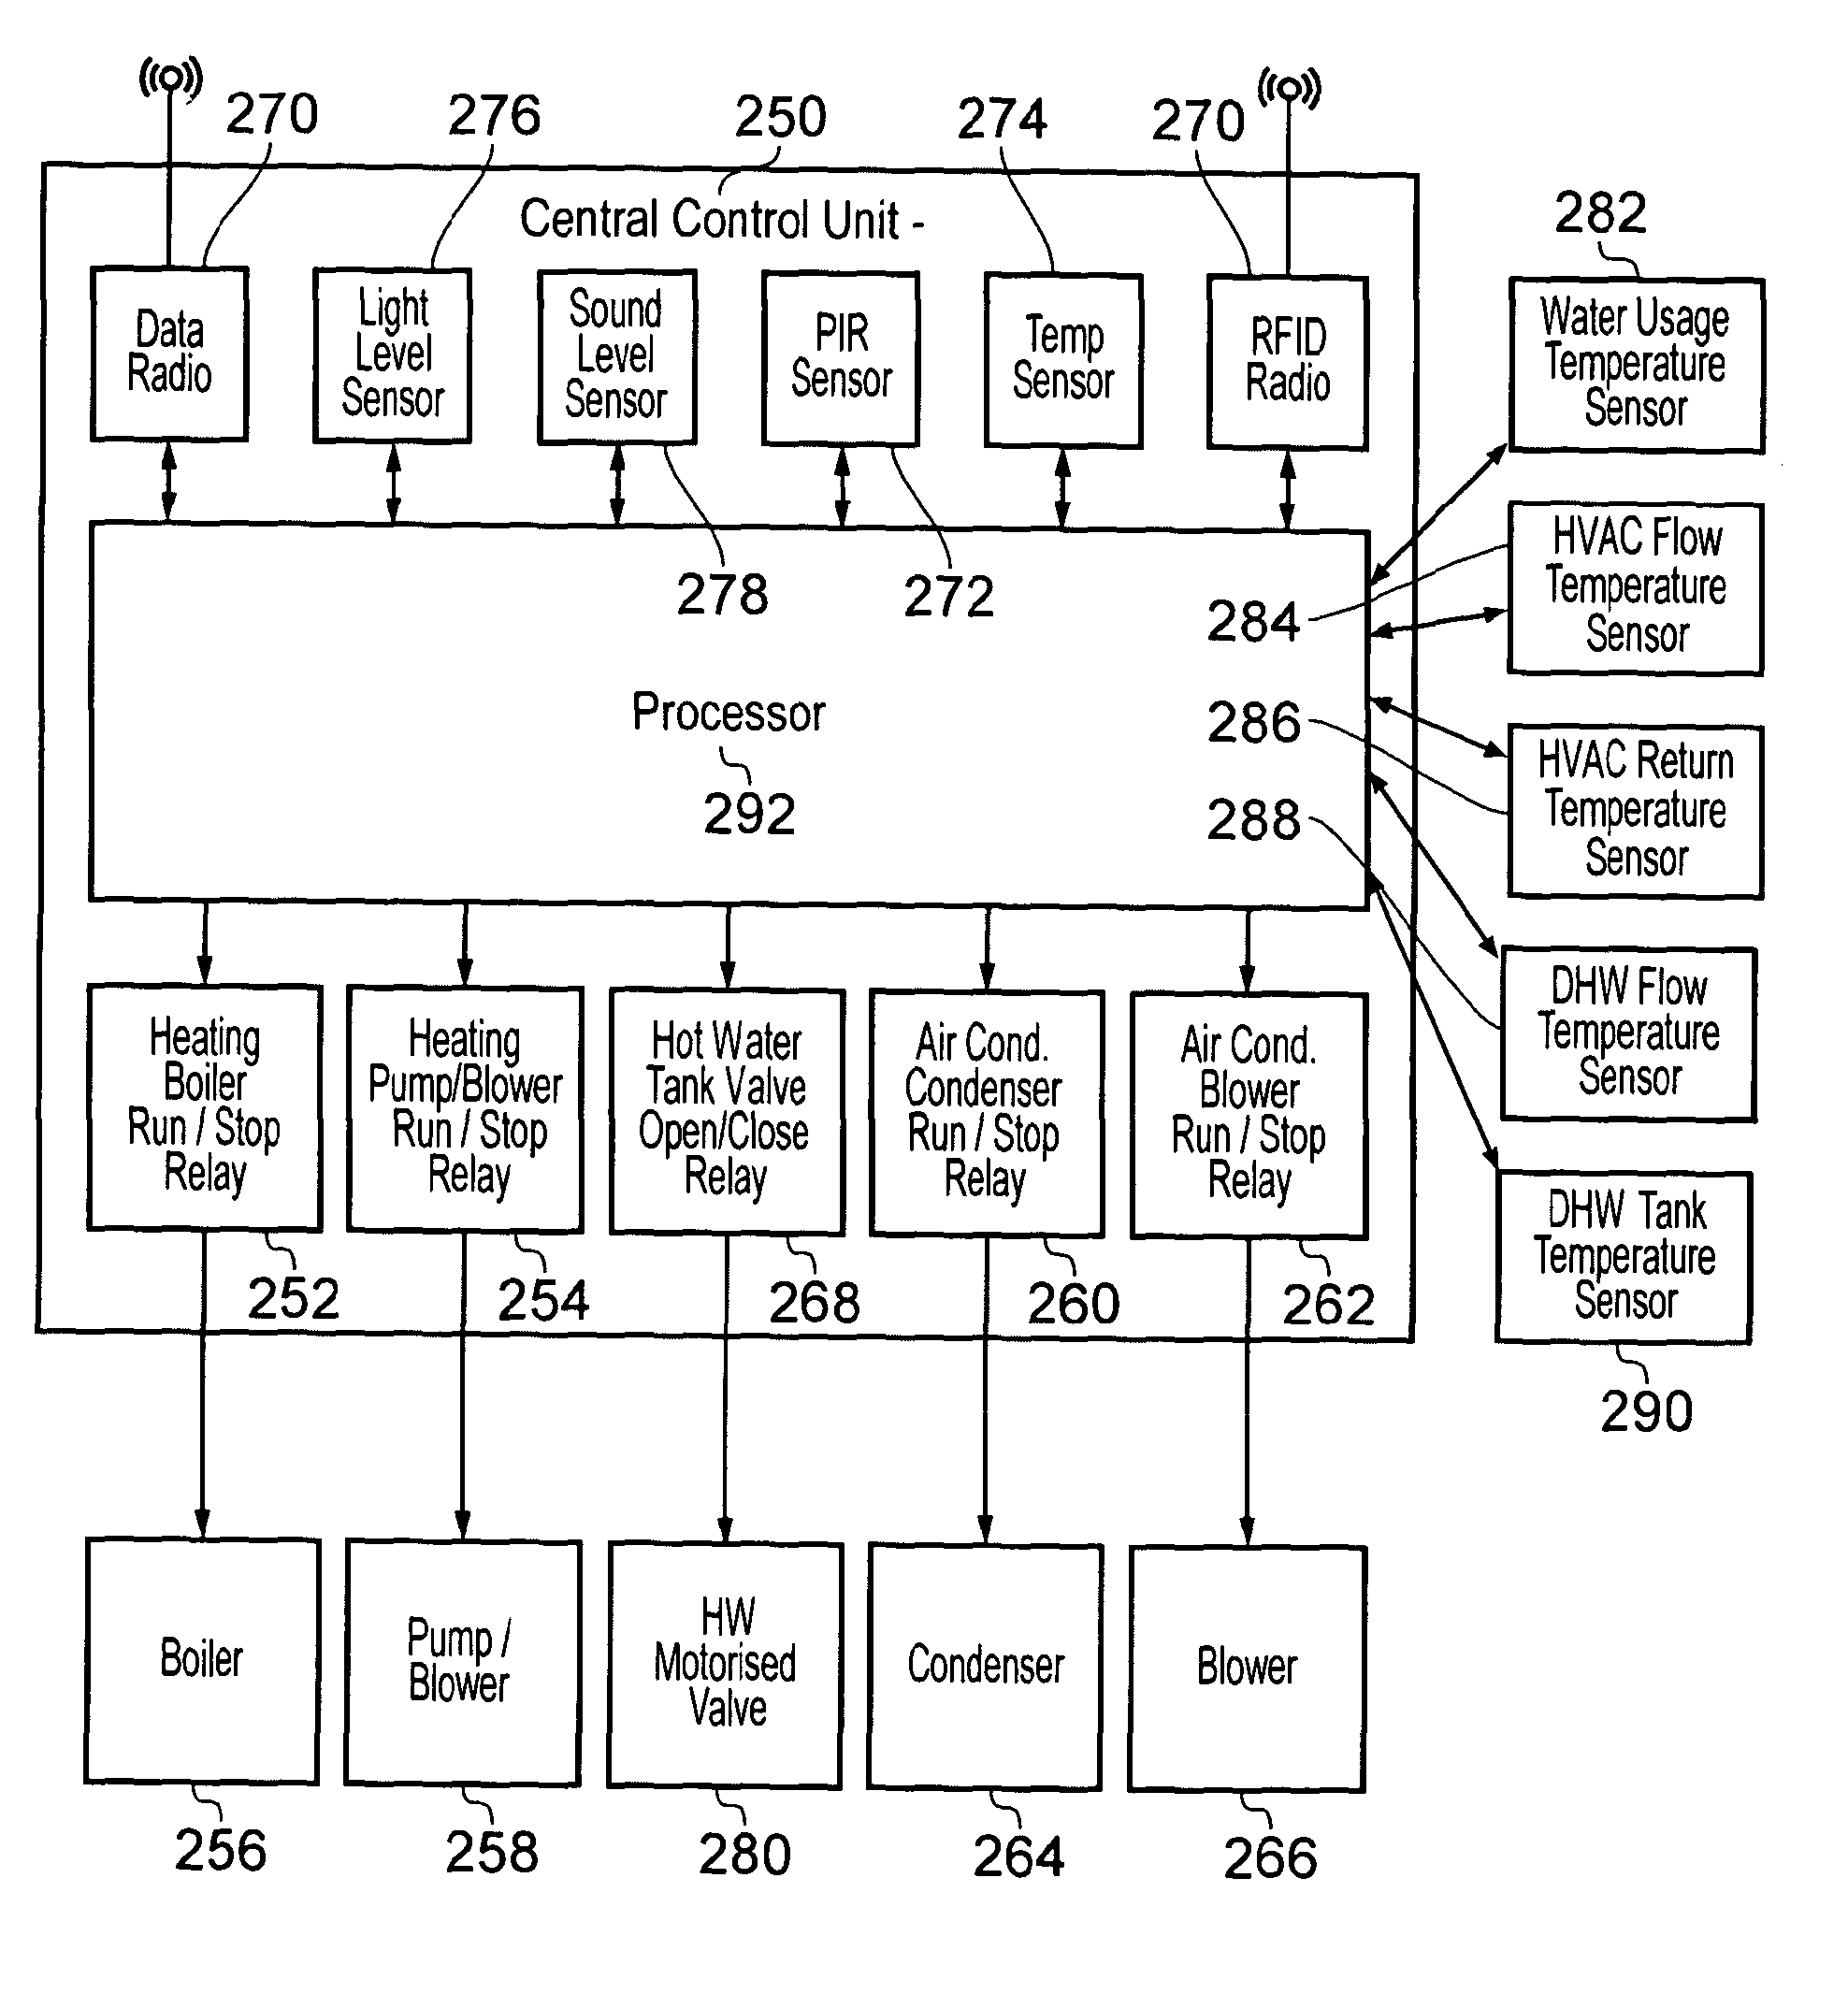 Building occupancy dependent control system